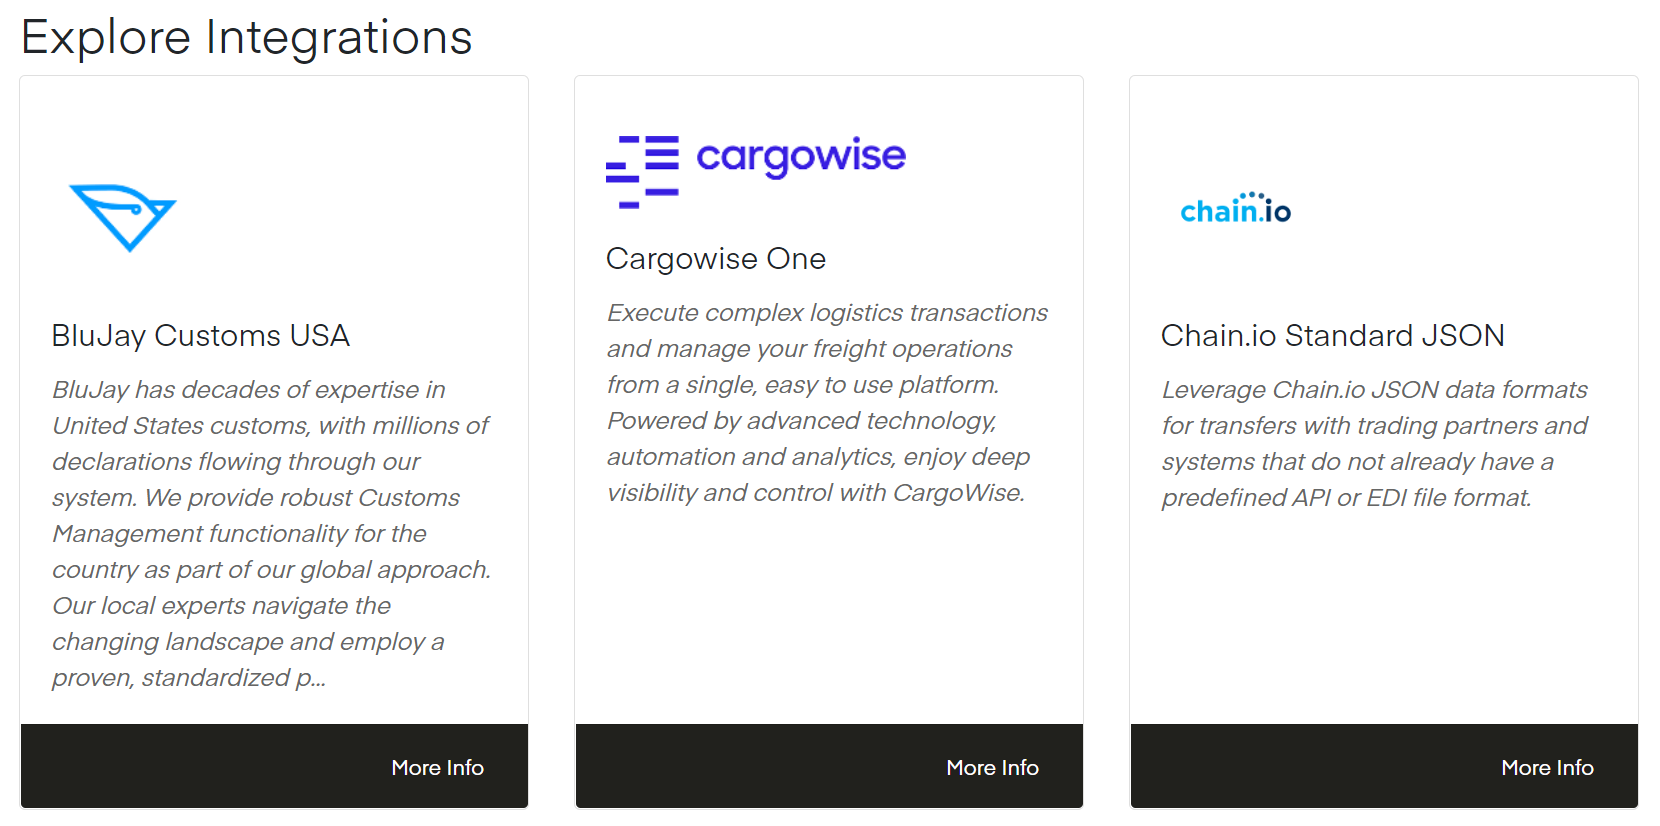 Preview of the all new integrations page - blujay customs, Cargowise, Chain.io standard JSON highlighted